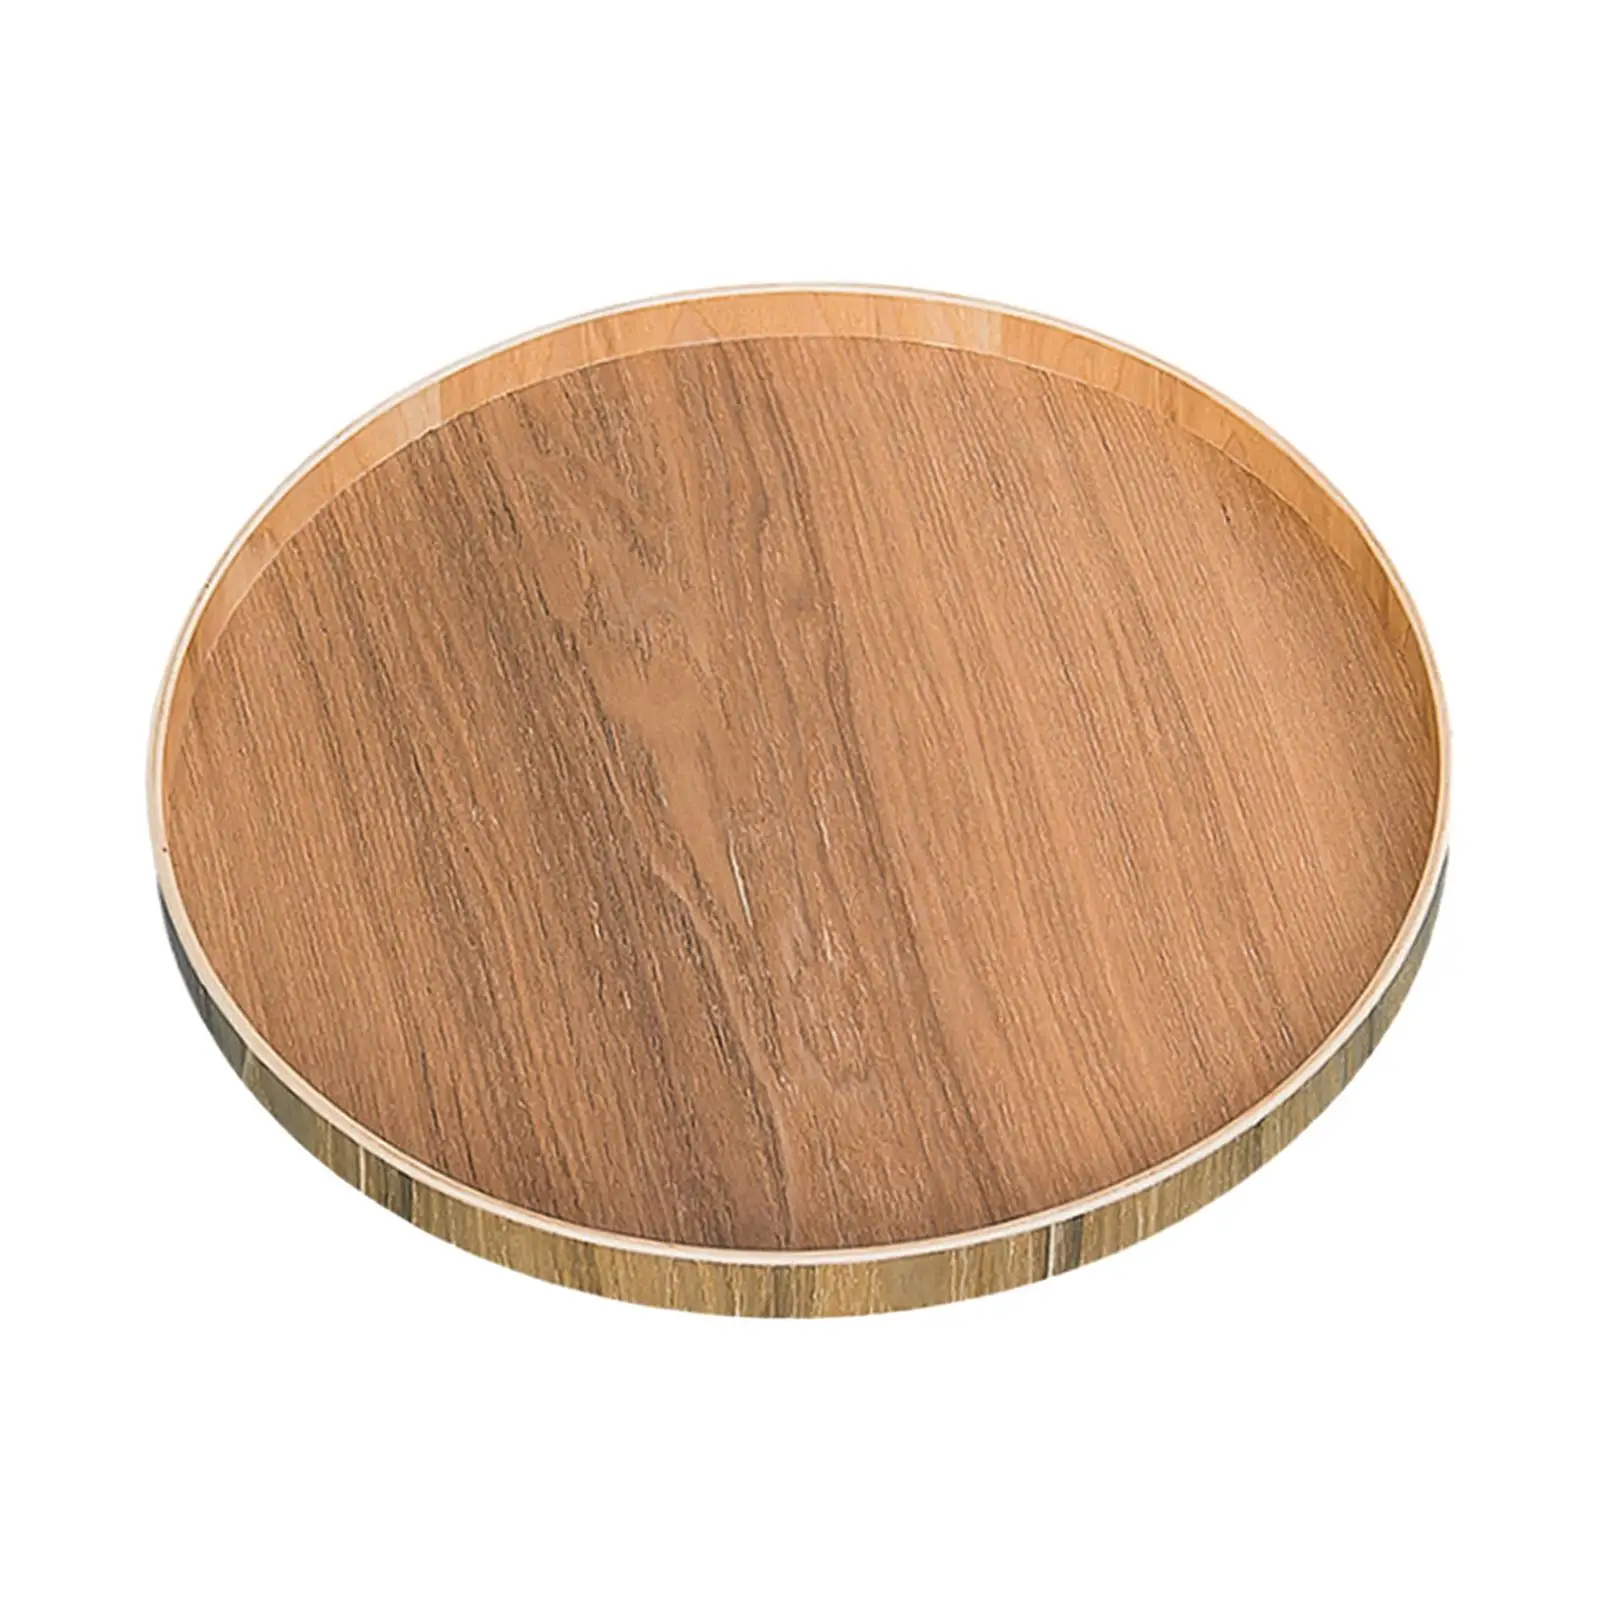 Wooden Serving Tray Food Holder Breakfast Tray Party Serving Platter for Dining Table Pantry Kitchen Countertop Bathroom Cabinet